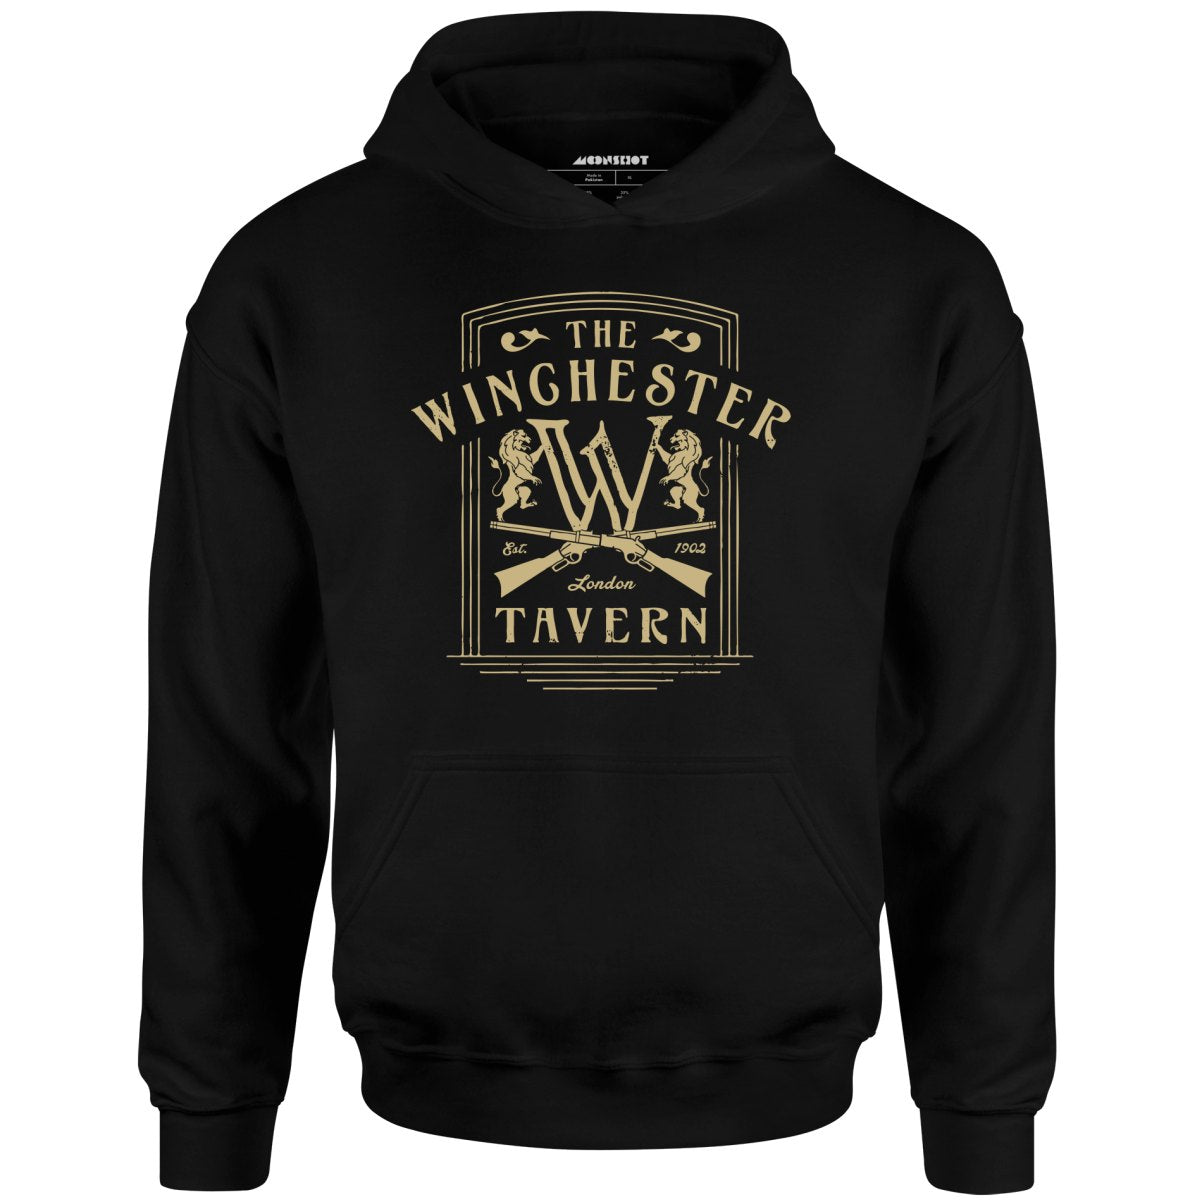 The Winchester Tavern - Shaun of the Dead - Unisex Hoodie